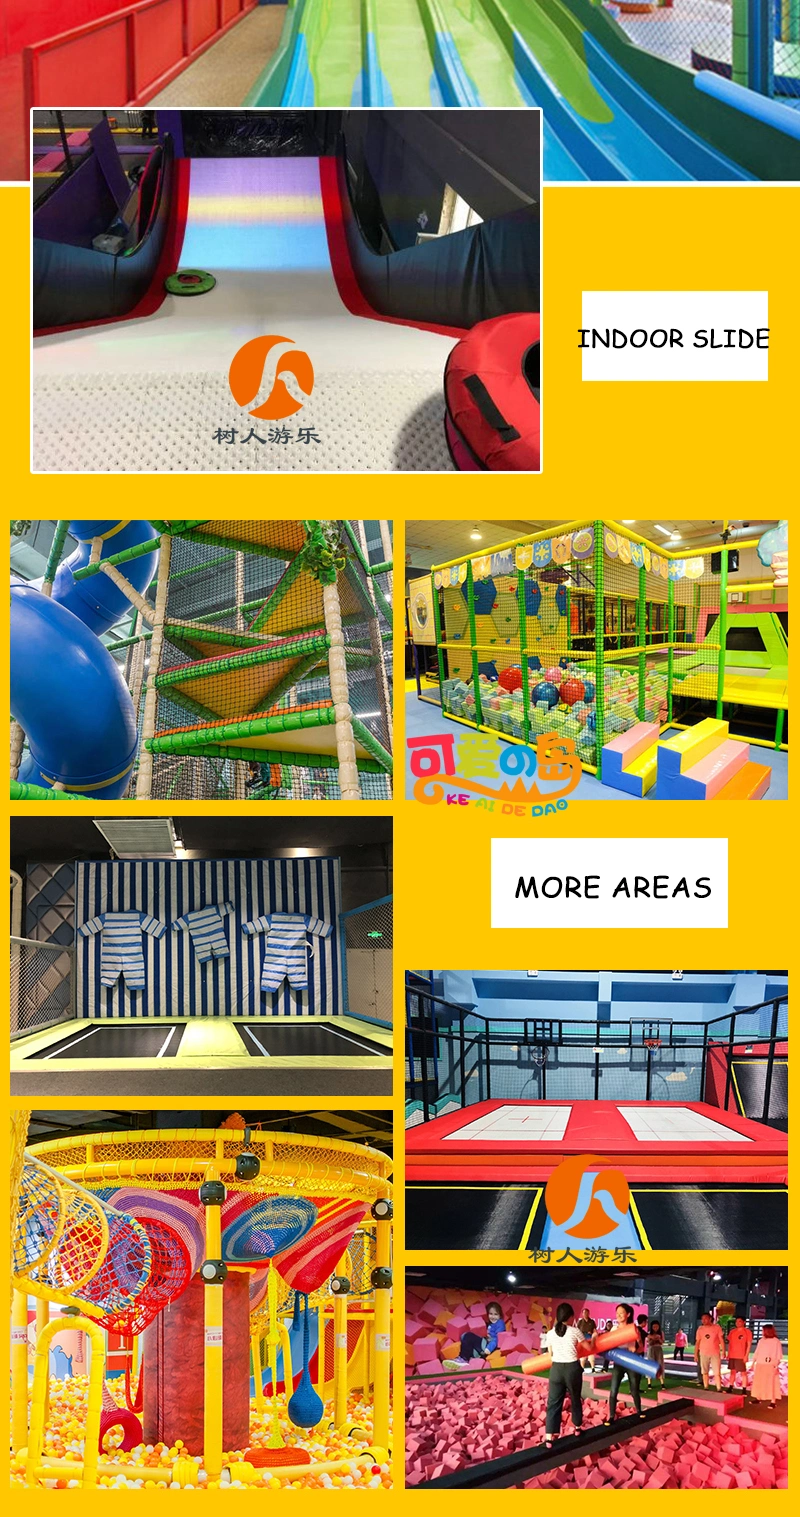 New and Large Indoor Sky Zone Jumping Bed Gymnastic Trampoline Park for Commercial Used